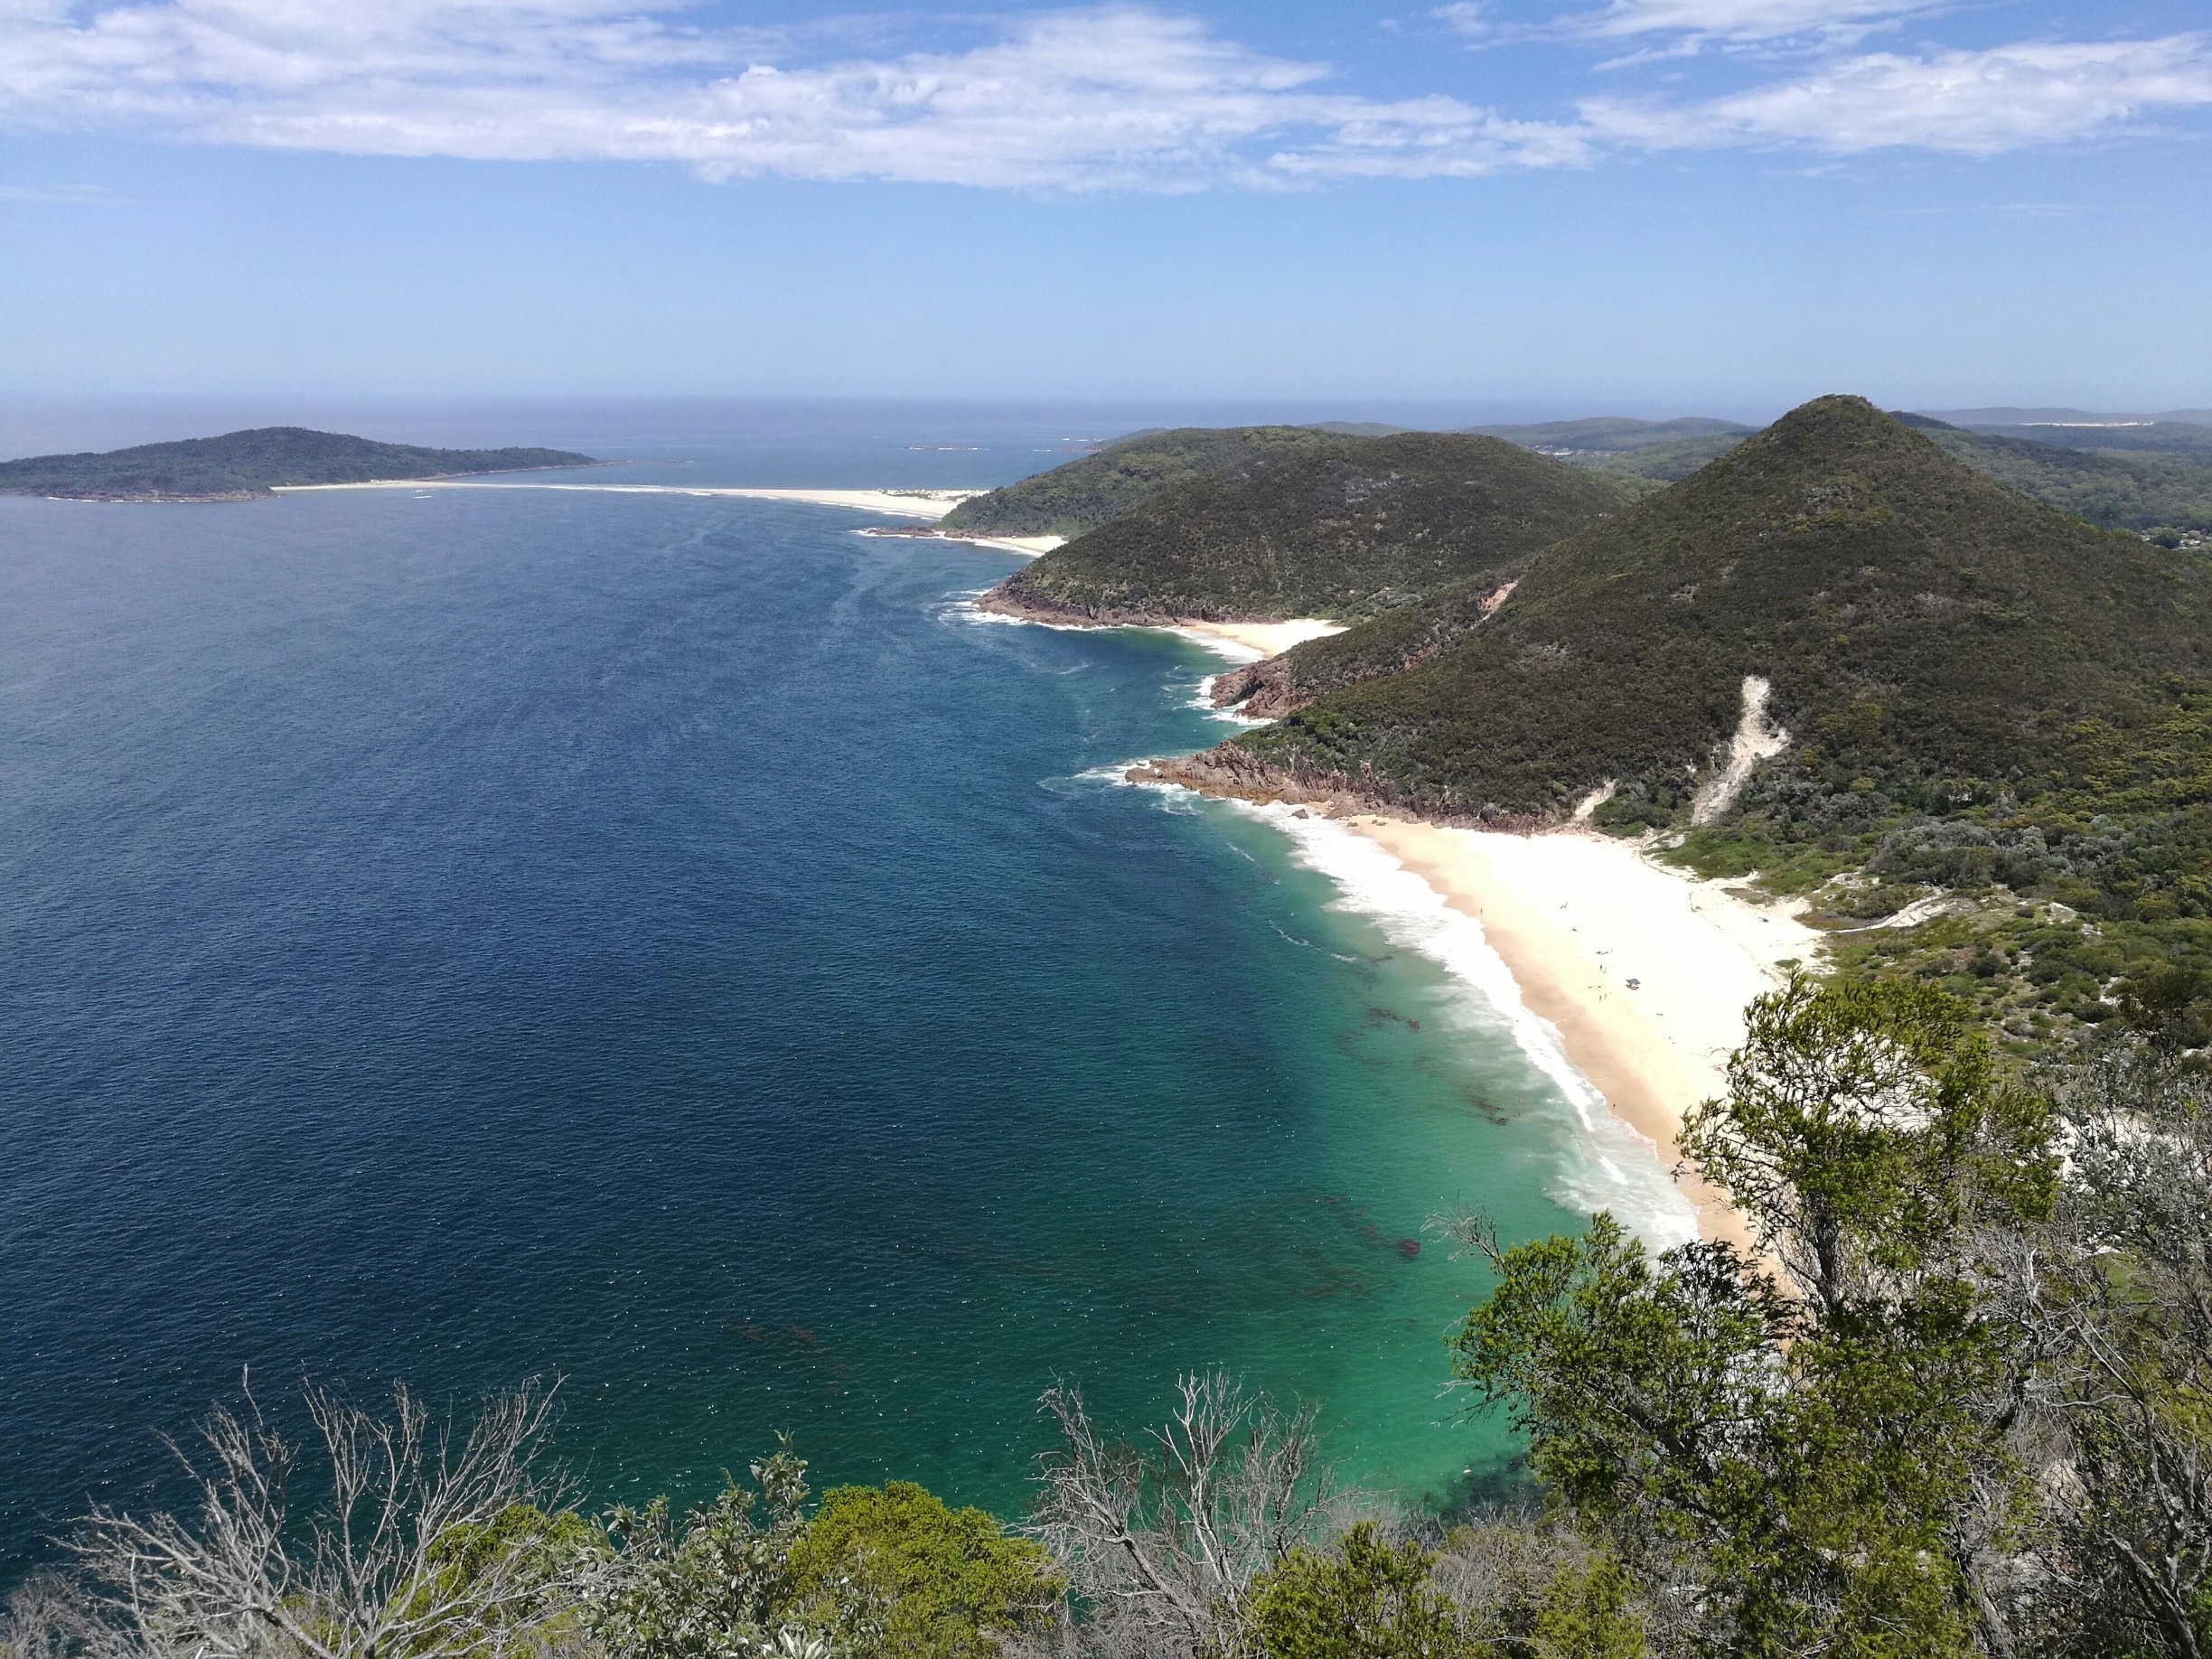 The view from Tomaree Head lookout point. About half hour of steep hike from the end of Shoal Bay, very much worth it.
#LifeAtExpedia